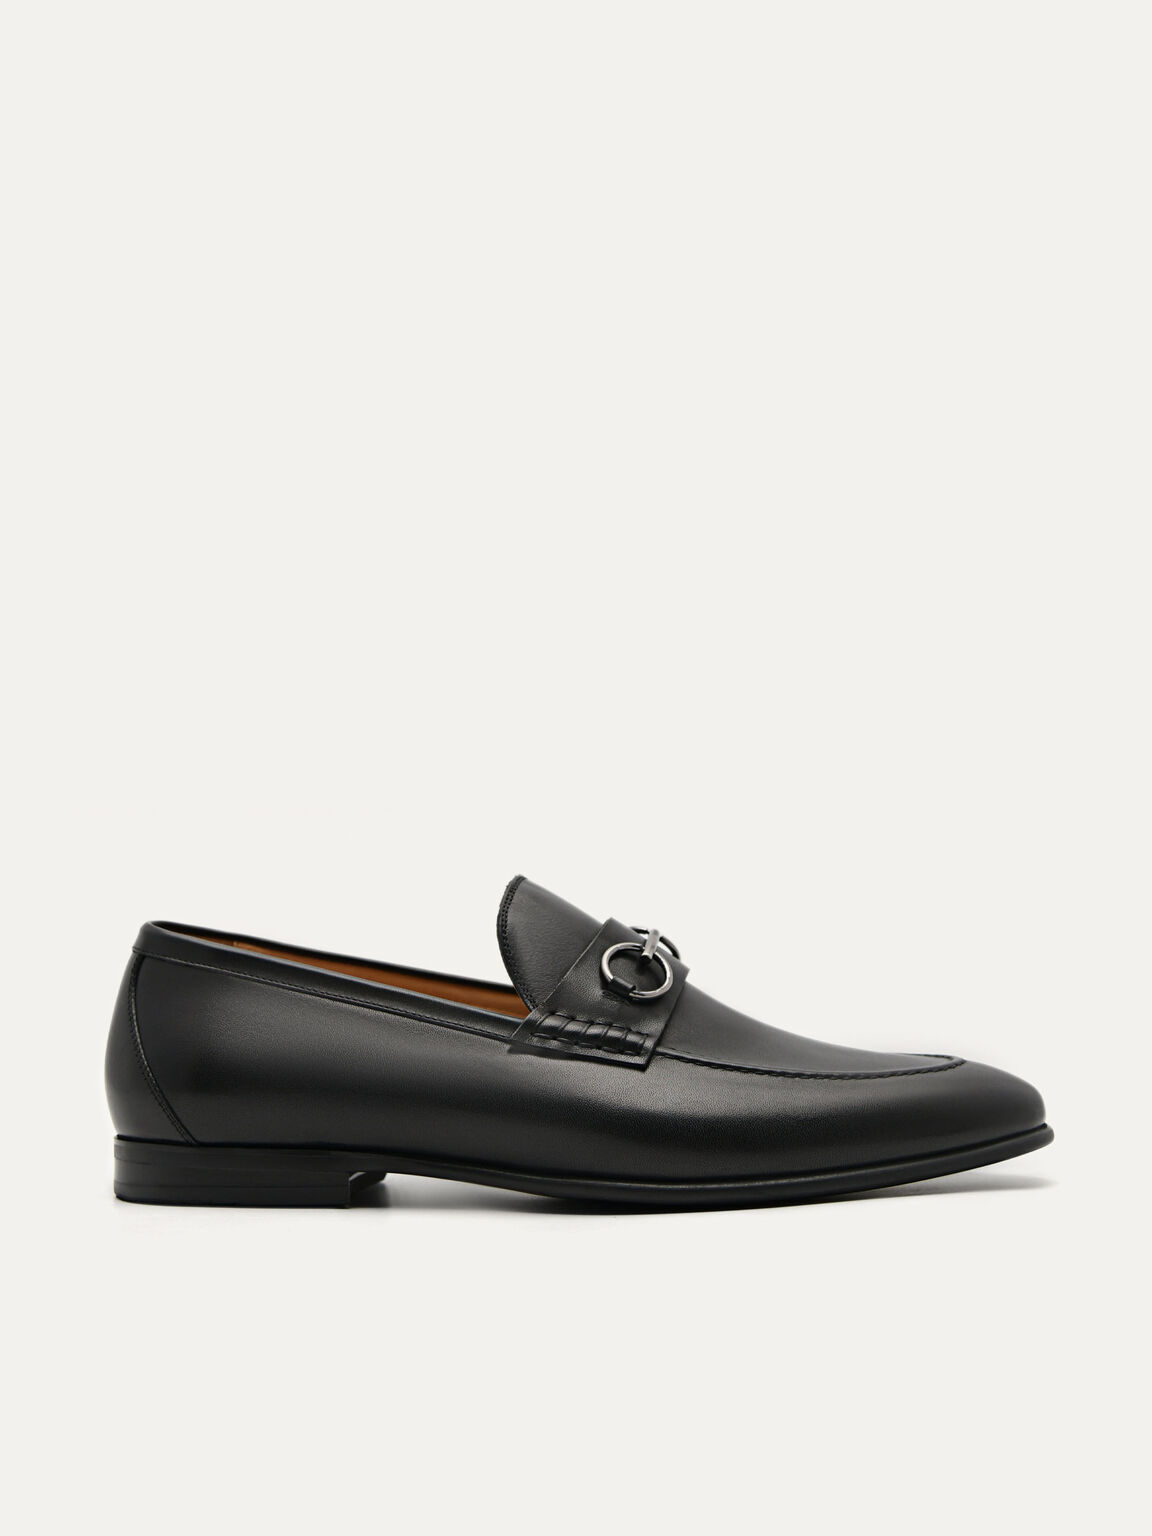 Gable Leather Loafers, Black